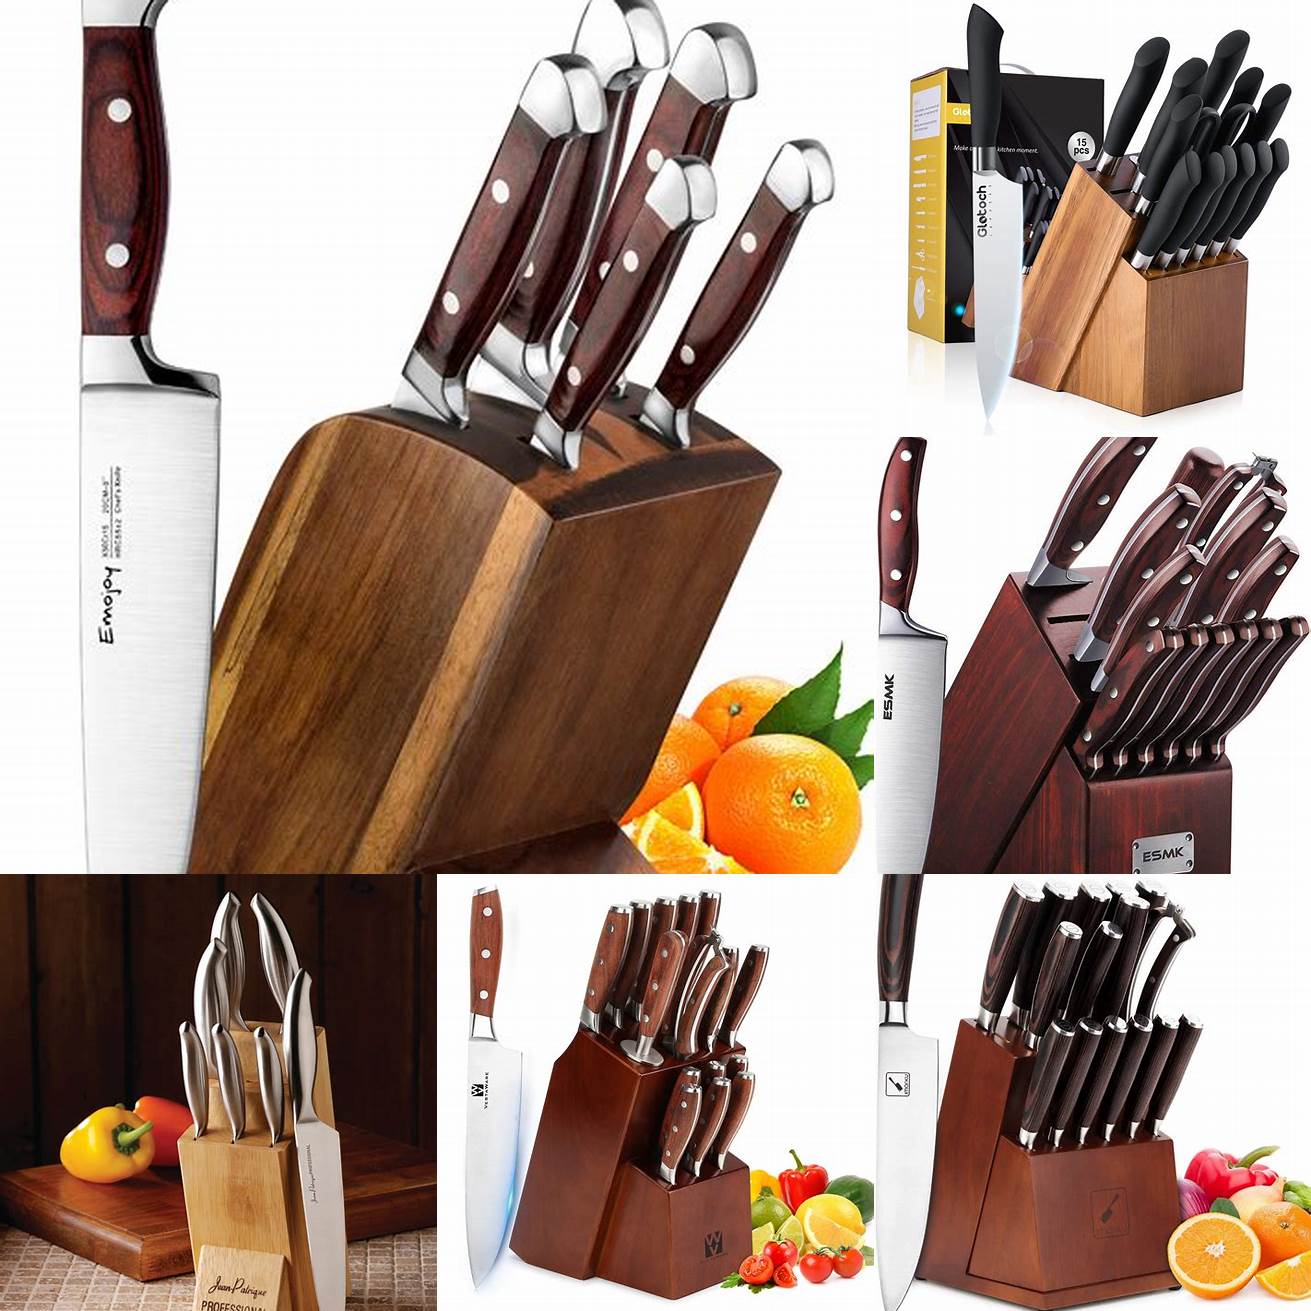 Knife set with wooden block